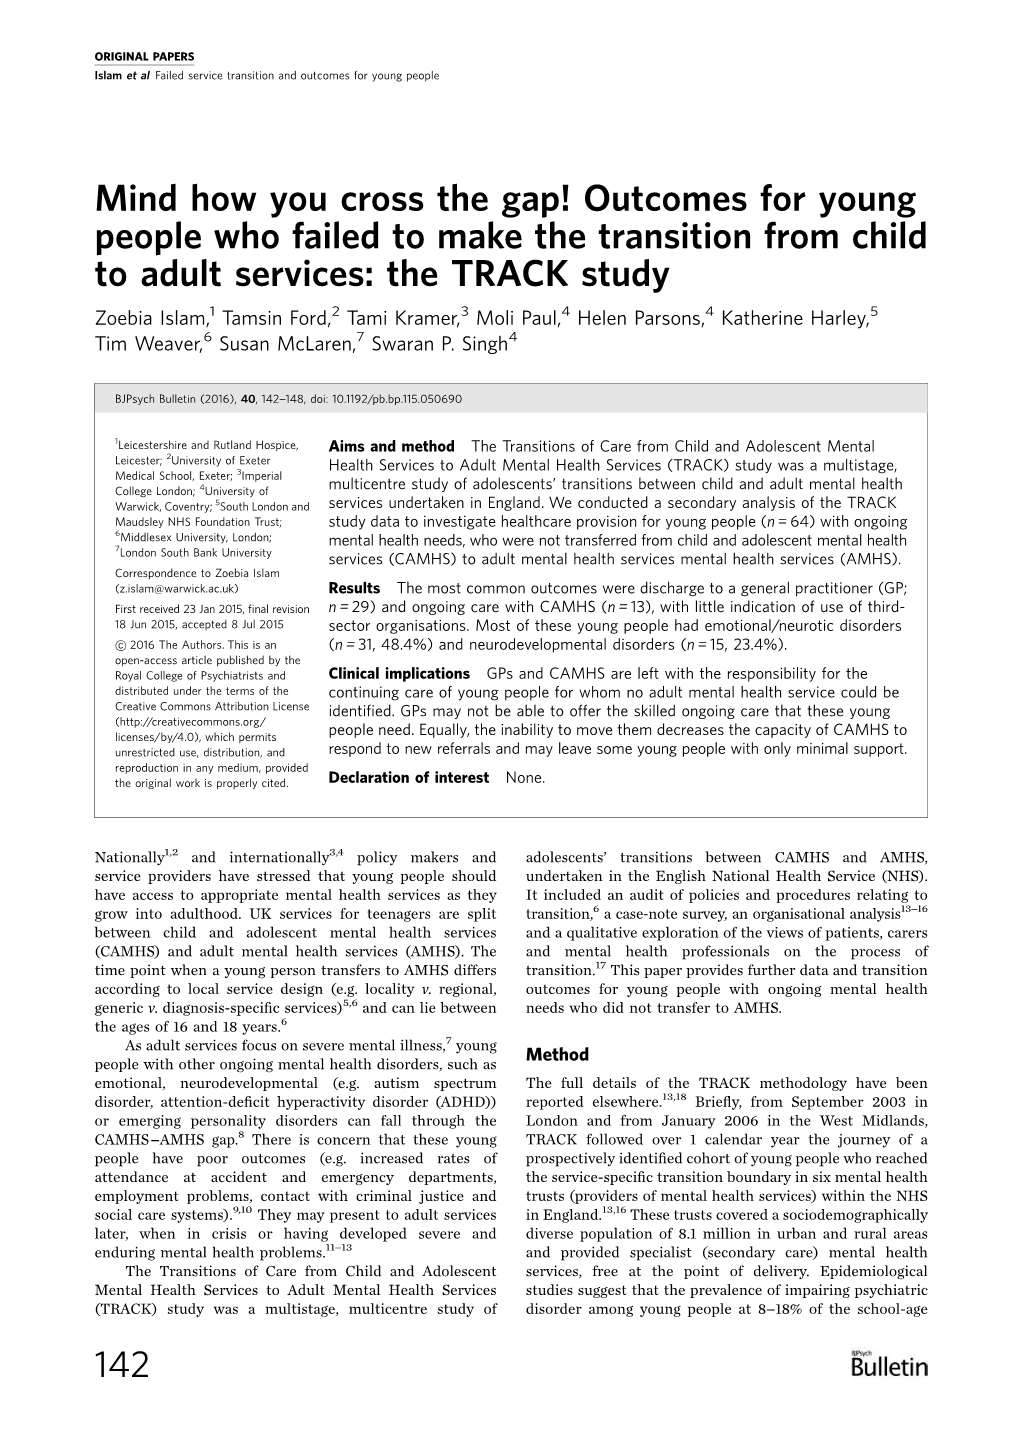 Mind How You Cross the Gap! Outcomes for Young People Who Failed to Make the Transition from Child to Adult Services: the TRACK